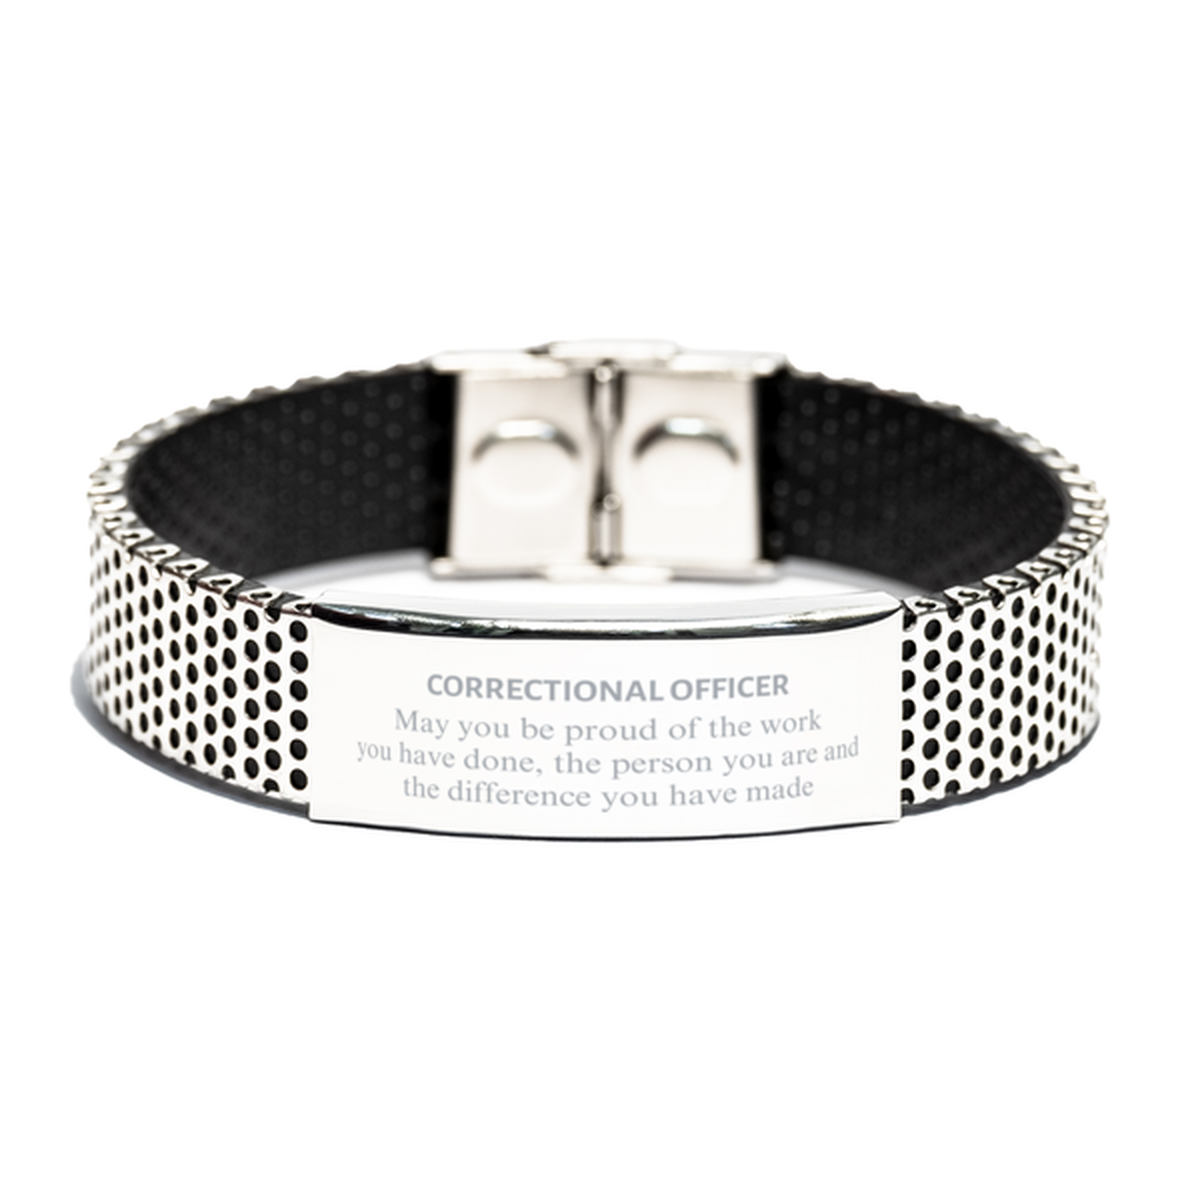 Correctional Officer May you be proud of the work you have done, Retirement Correctional Officer Stainless Steel Bracelet for Colleague Appreciation Gifts Amazing for Correctional Officer